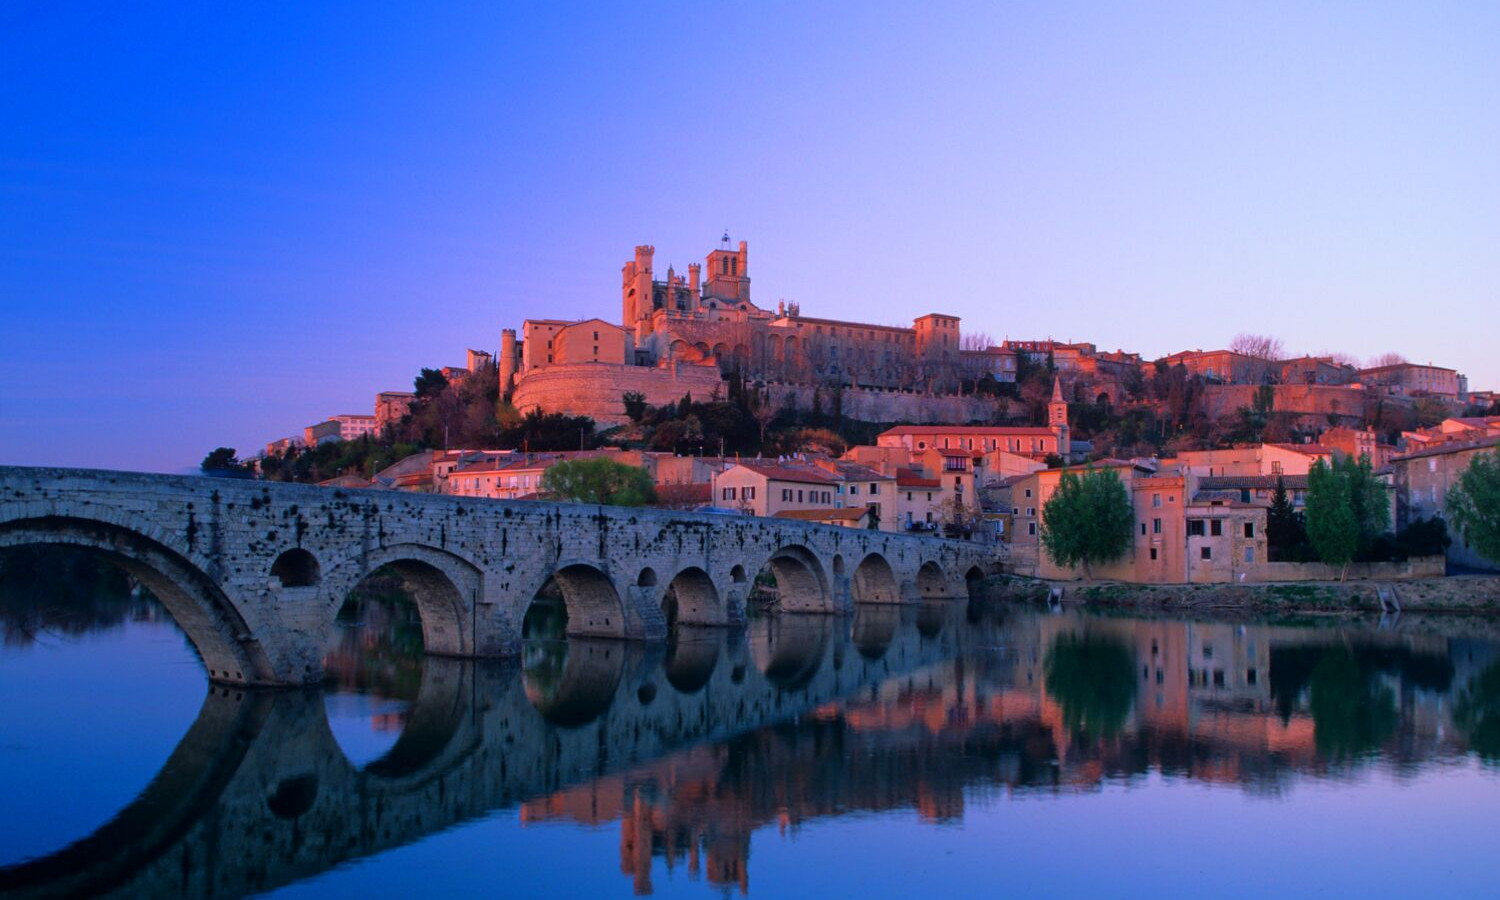 Dusk in Beziers